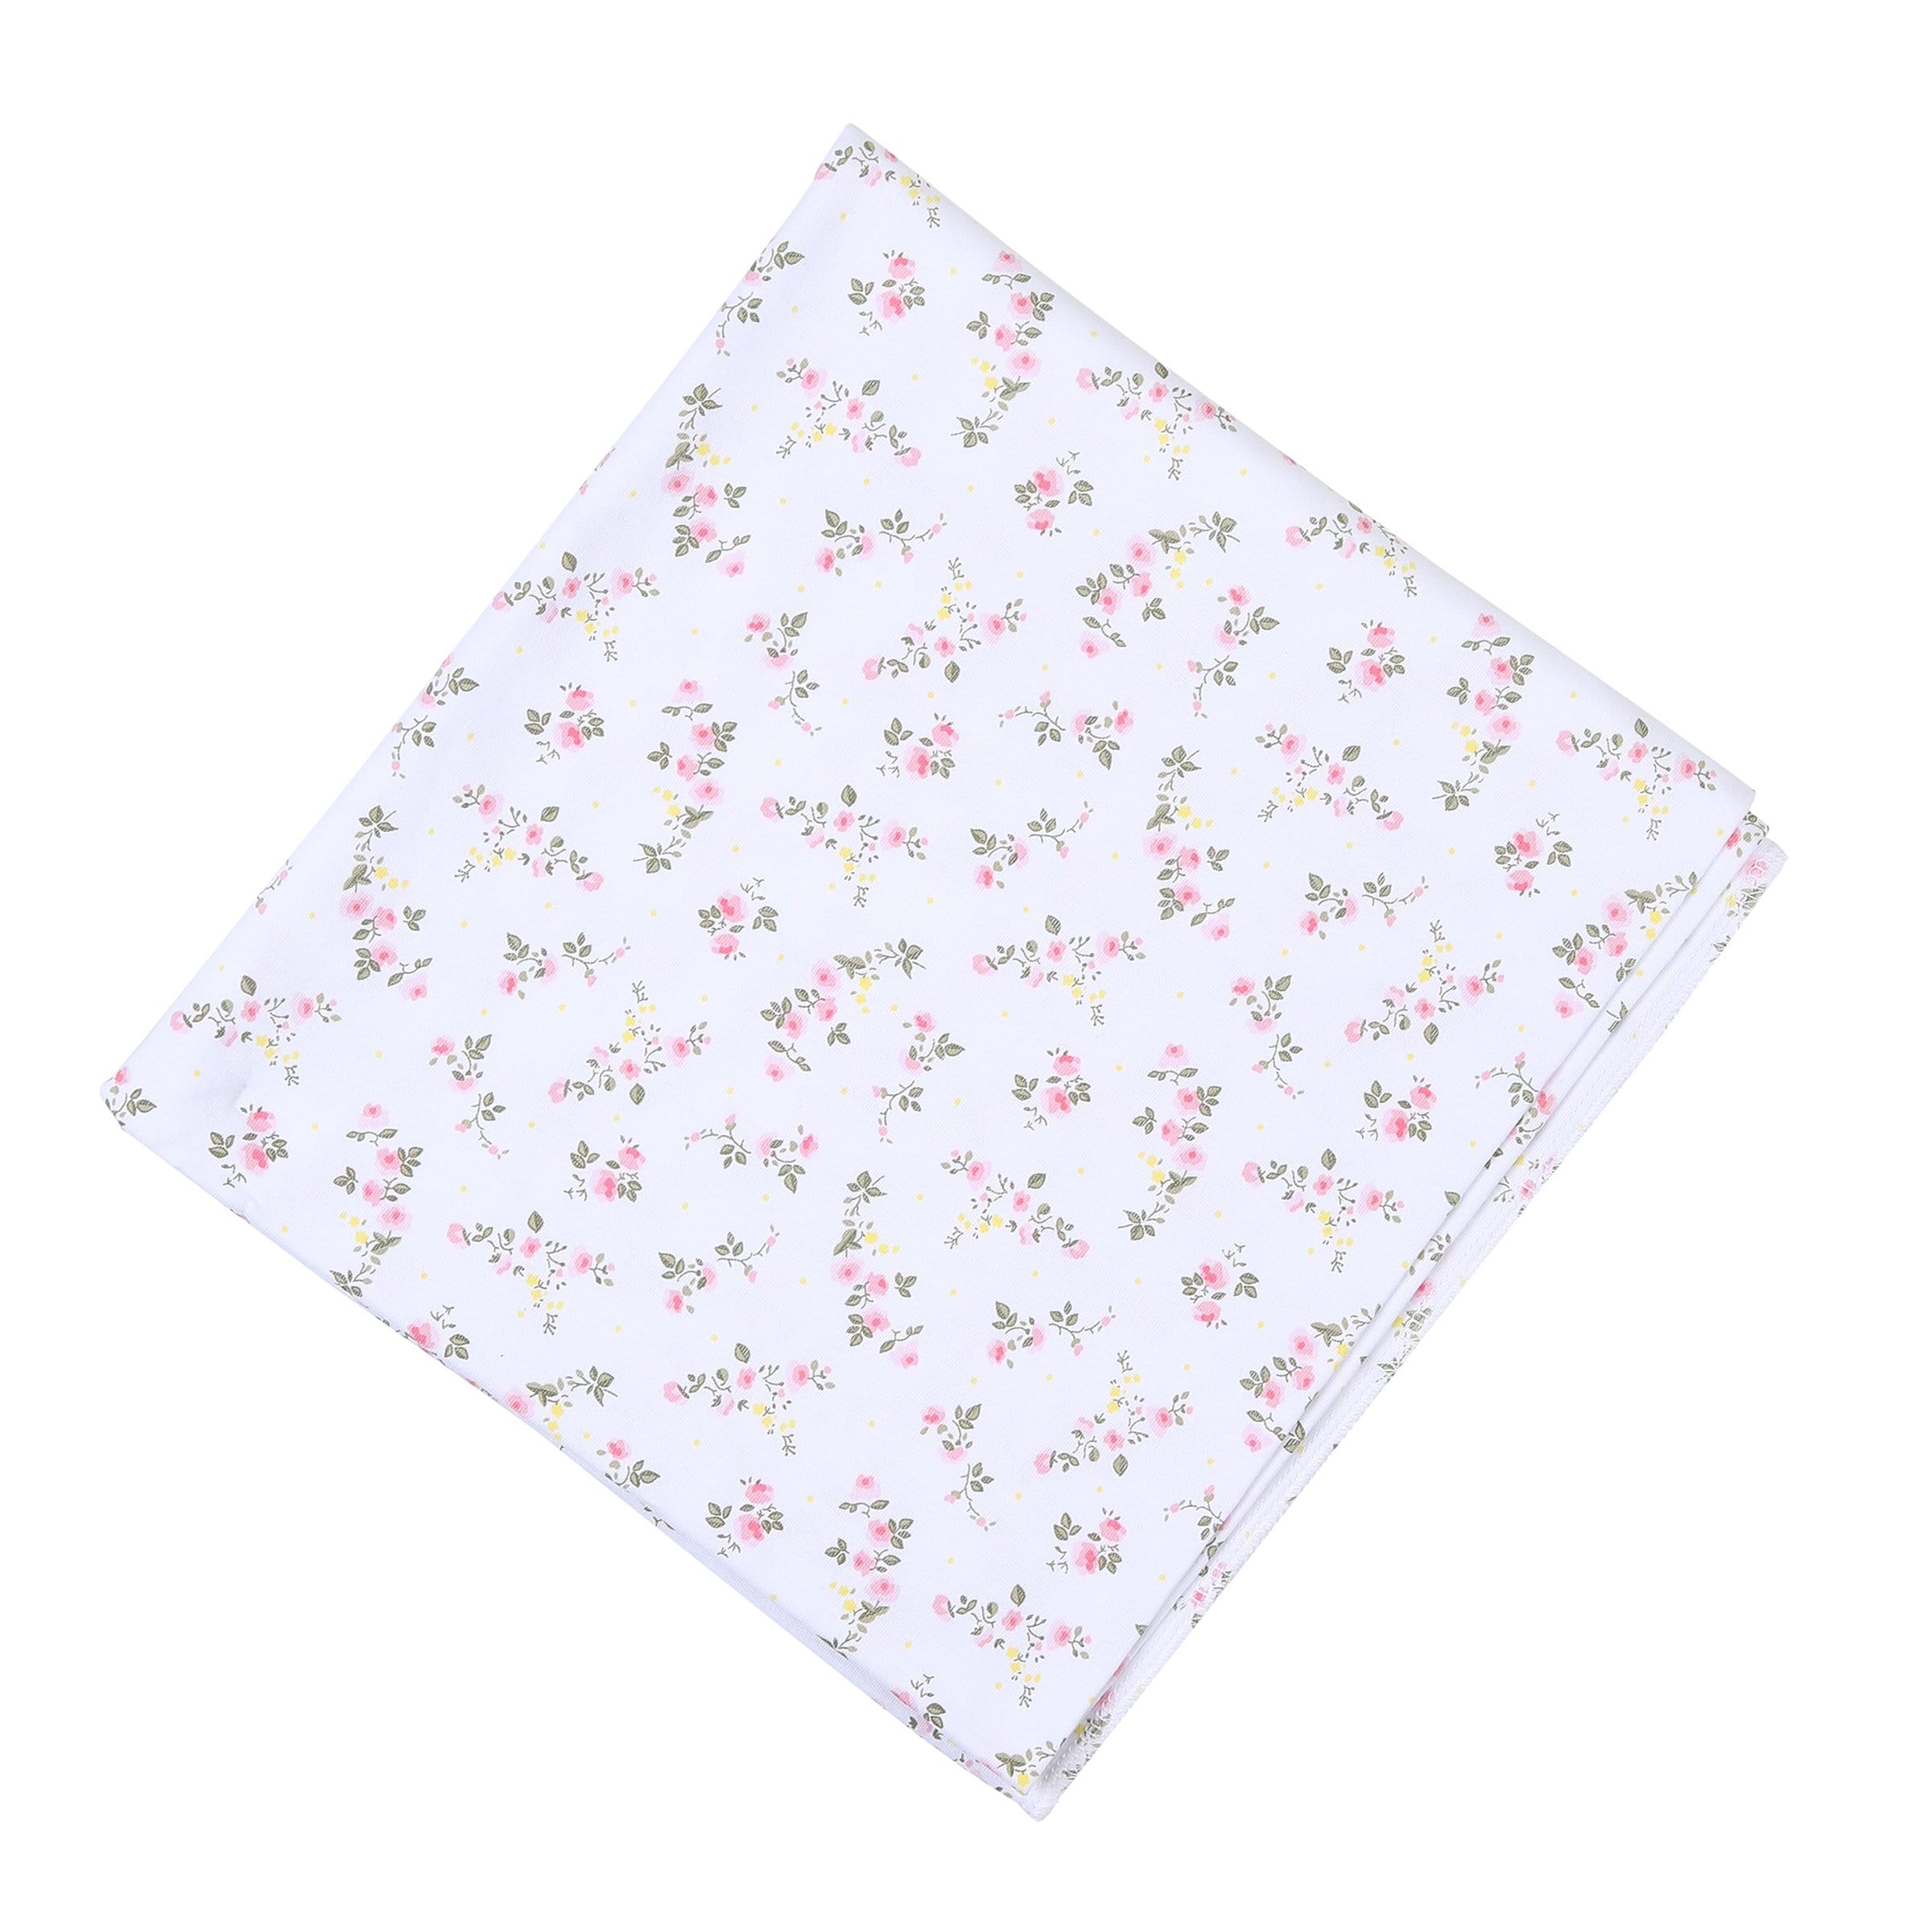 MAGNOLIA BABY - Graces Classics Swaddle Blanket - Floral